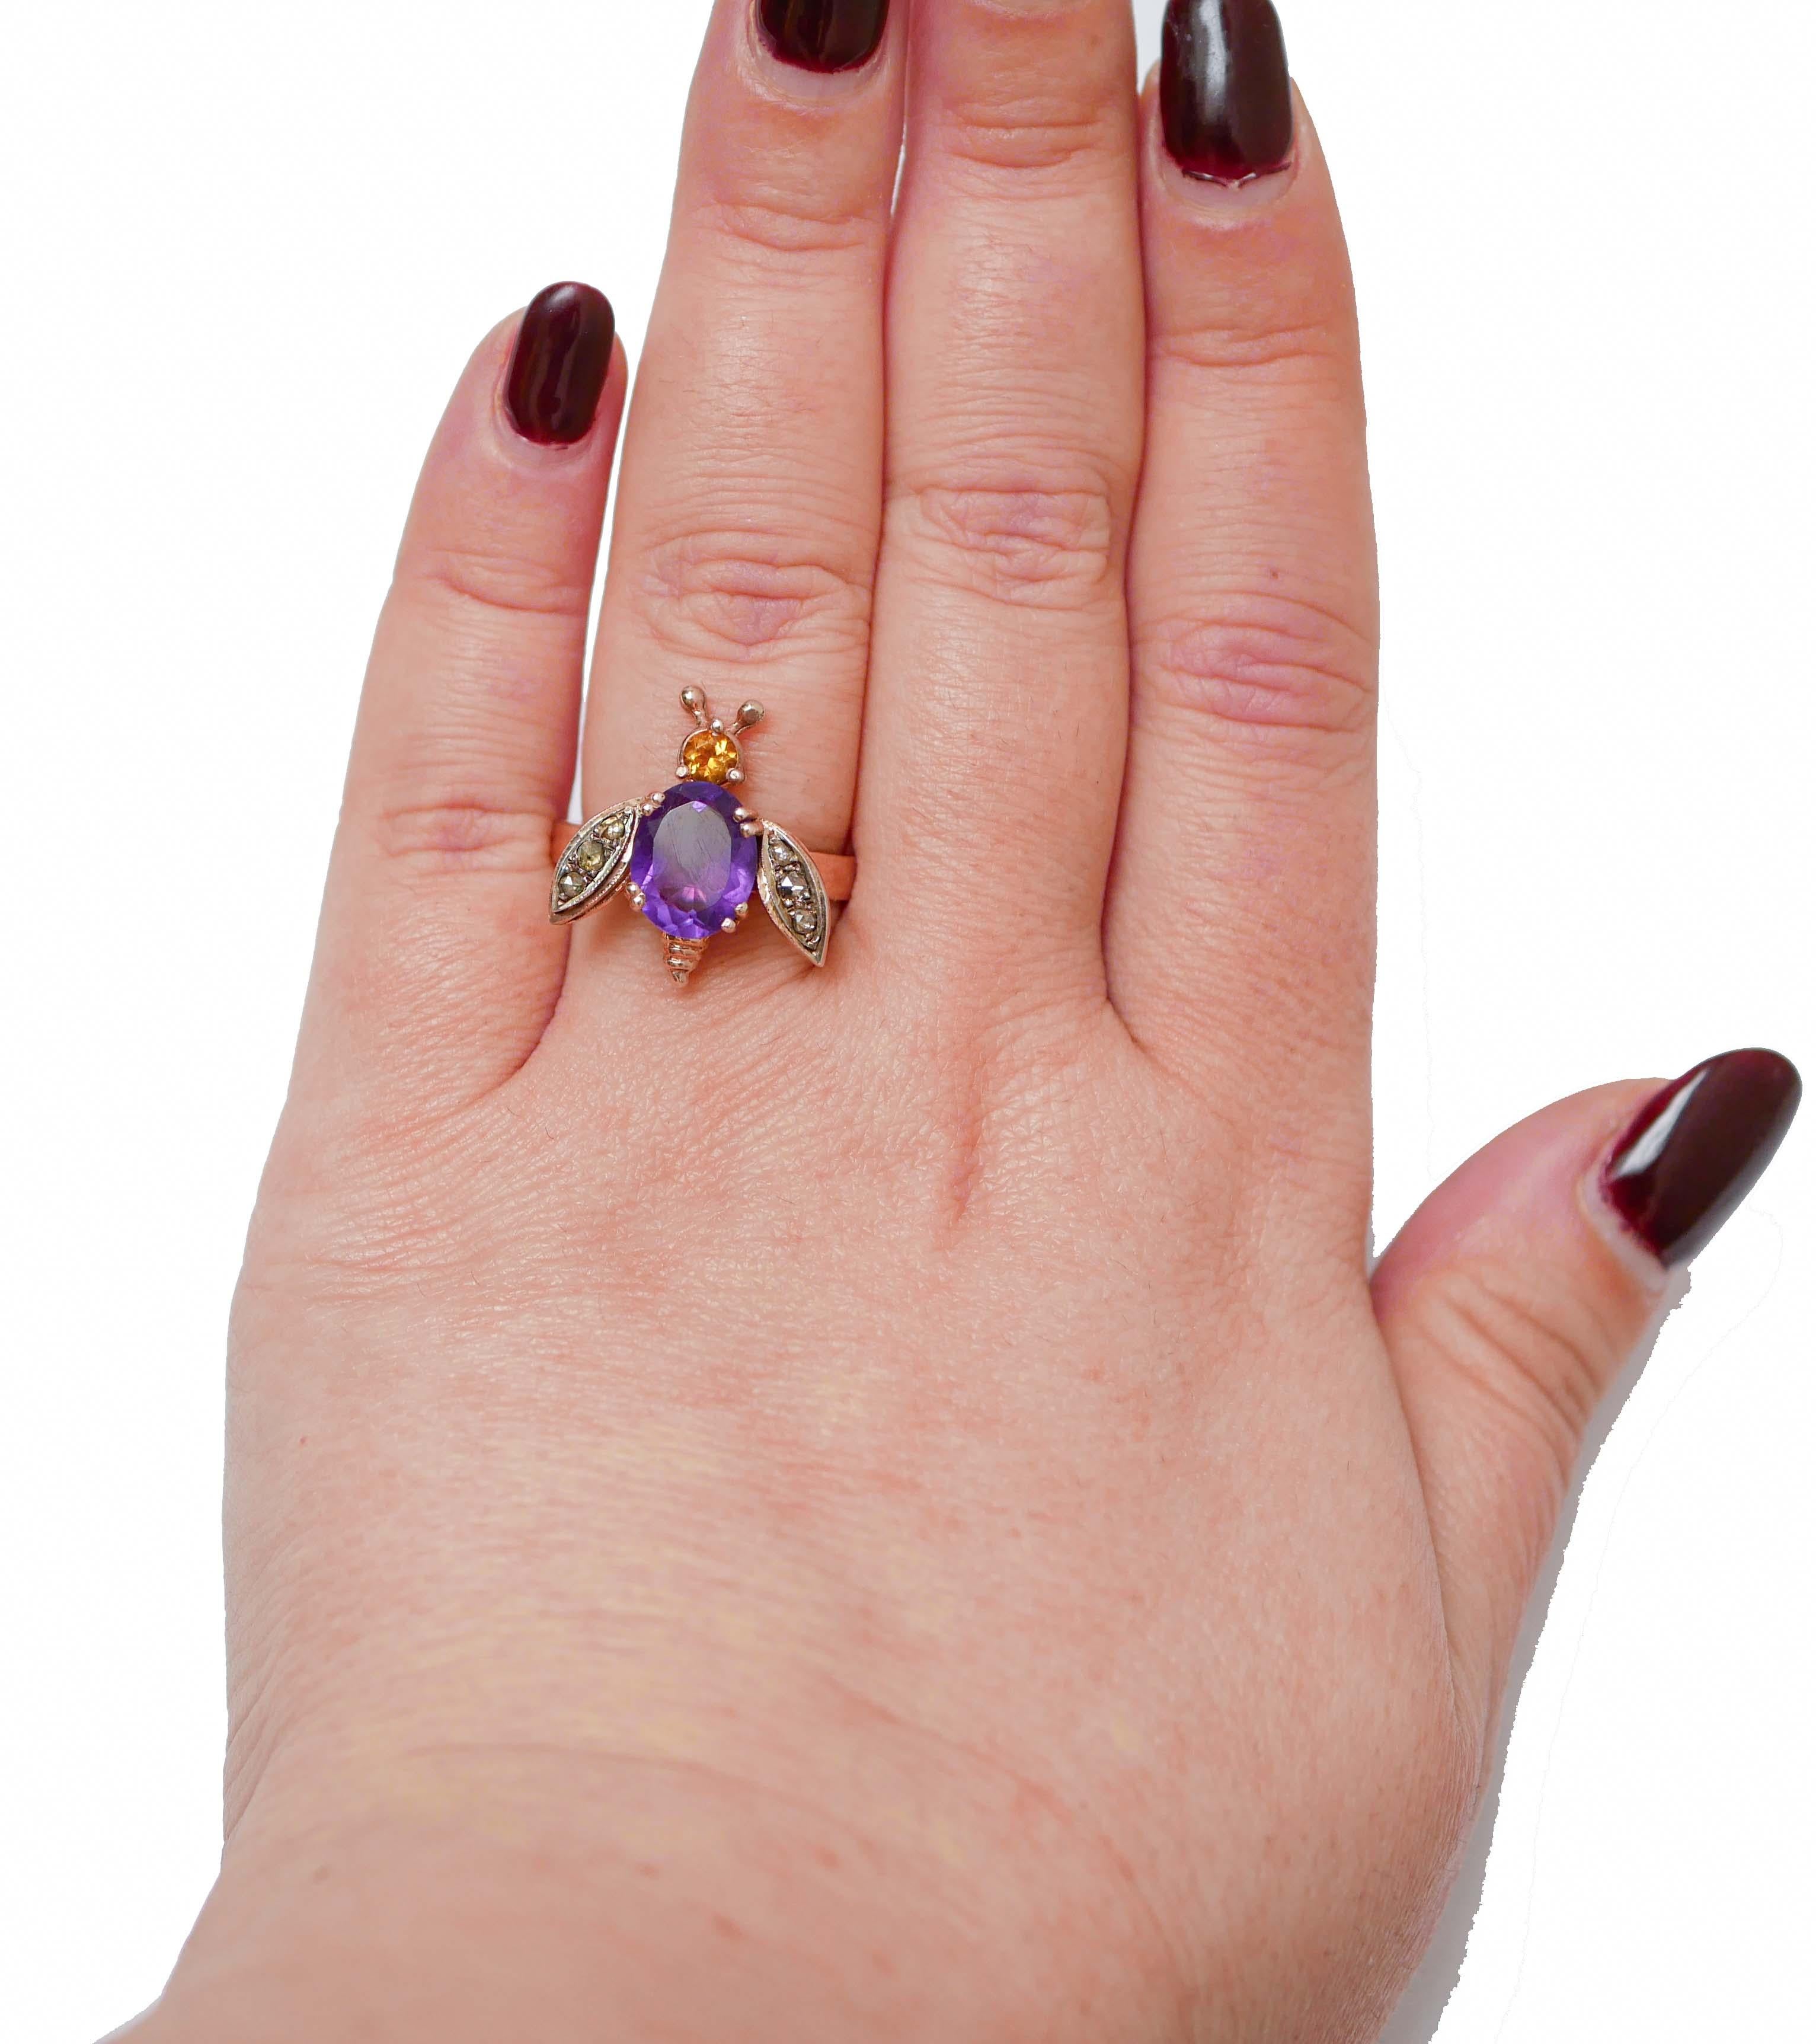 Mixed Cut Amethyst, Topaz, Diamonds, Rose Gold and Silver Fly Ring. For Sale